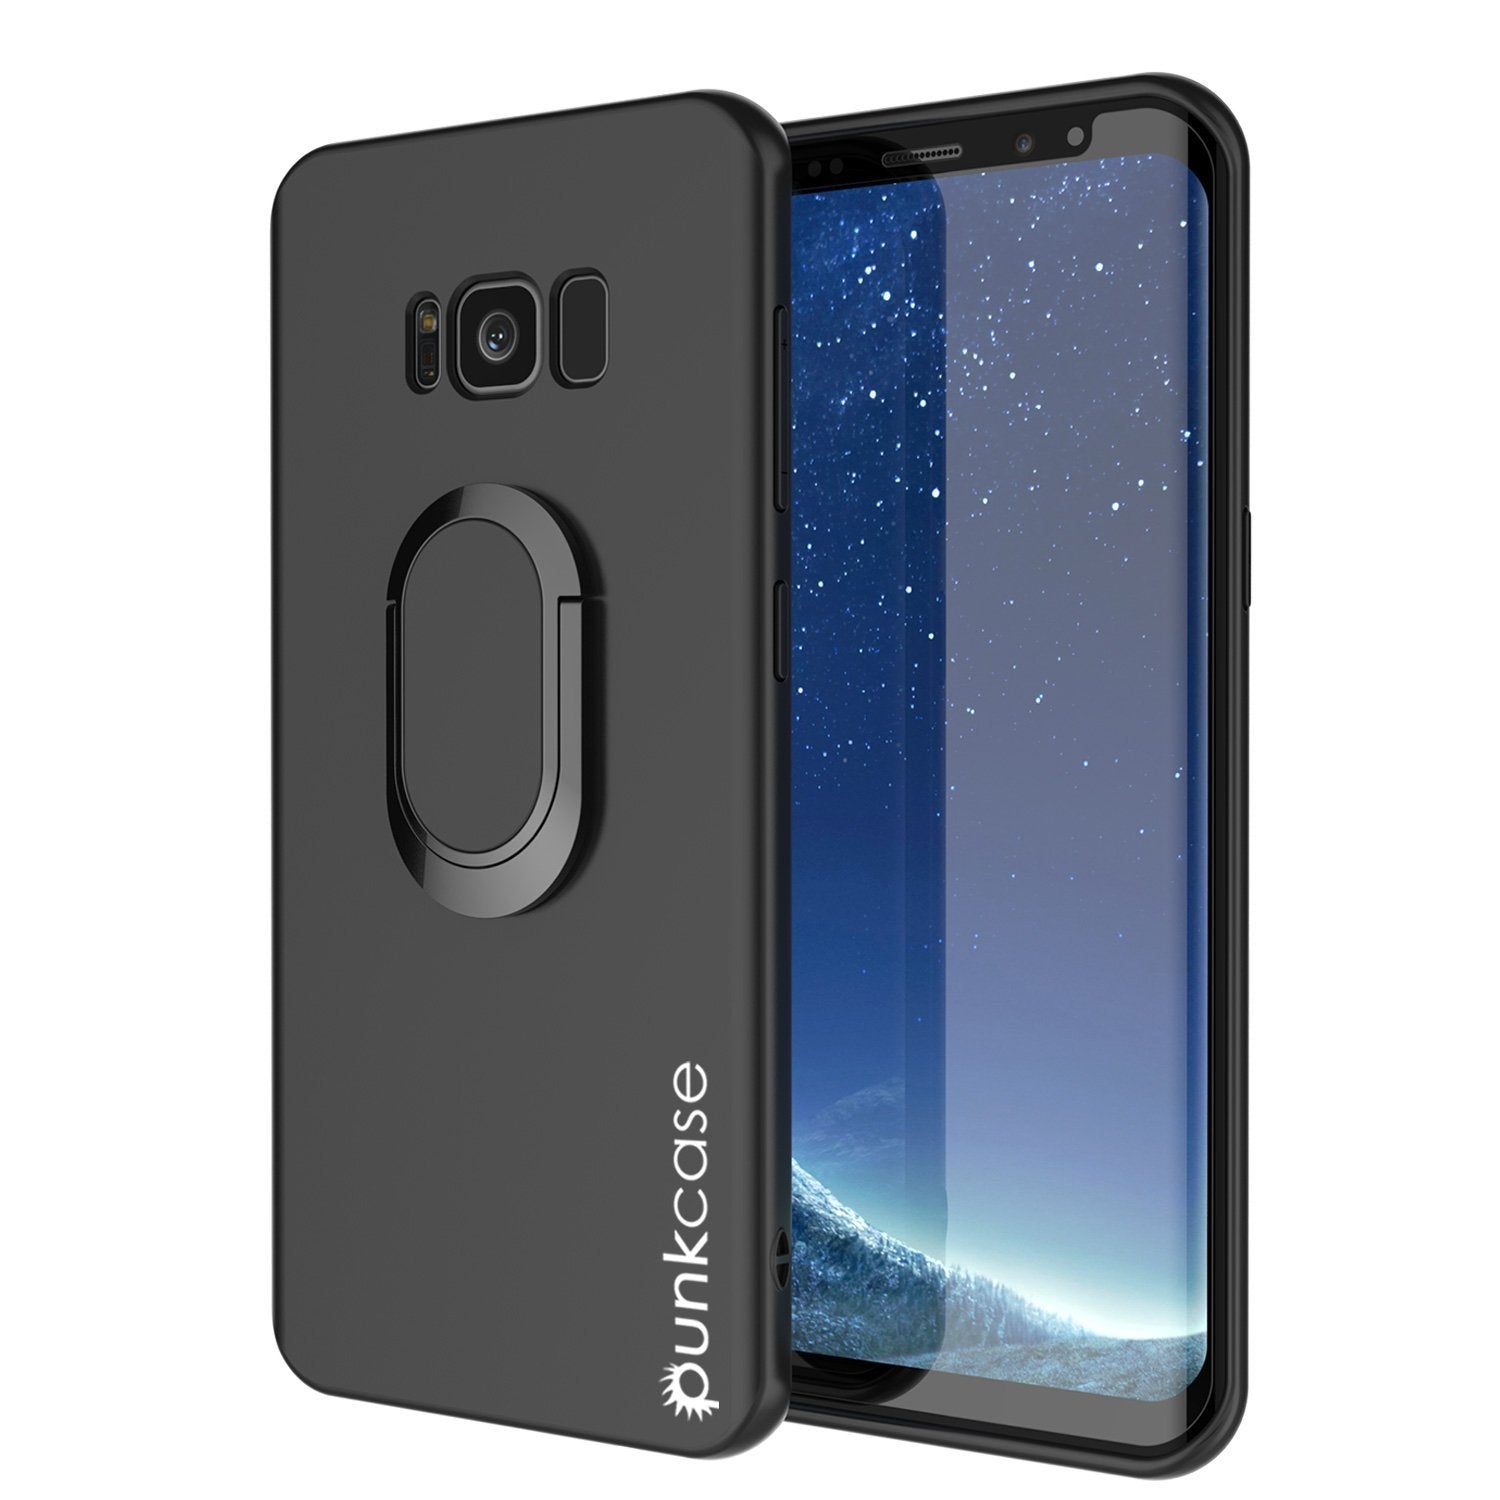 Galaxy S8 Case, Punkcase Magnetix Protective TPU Cover Black